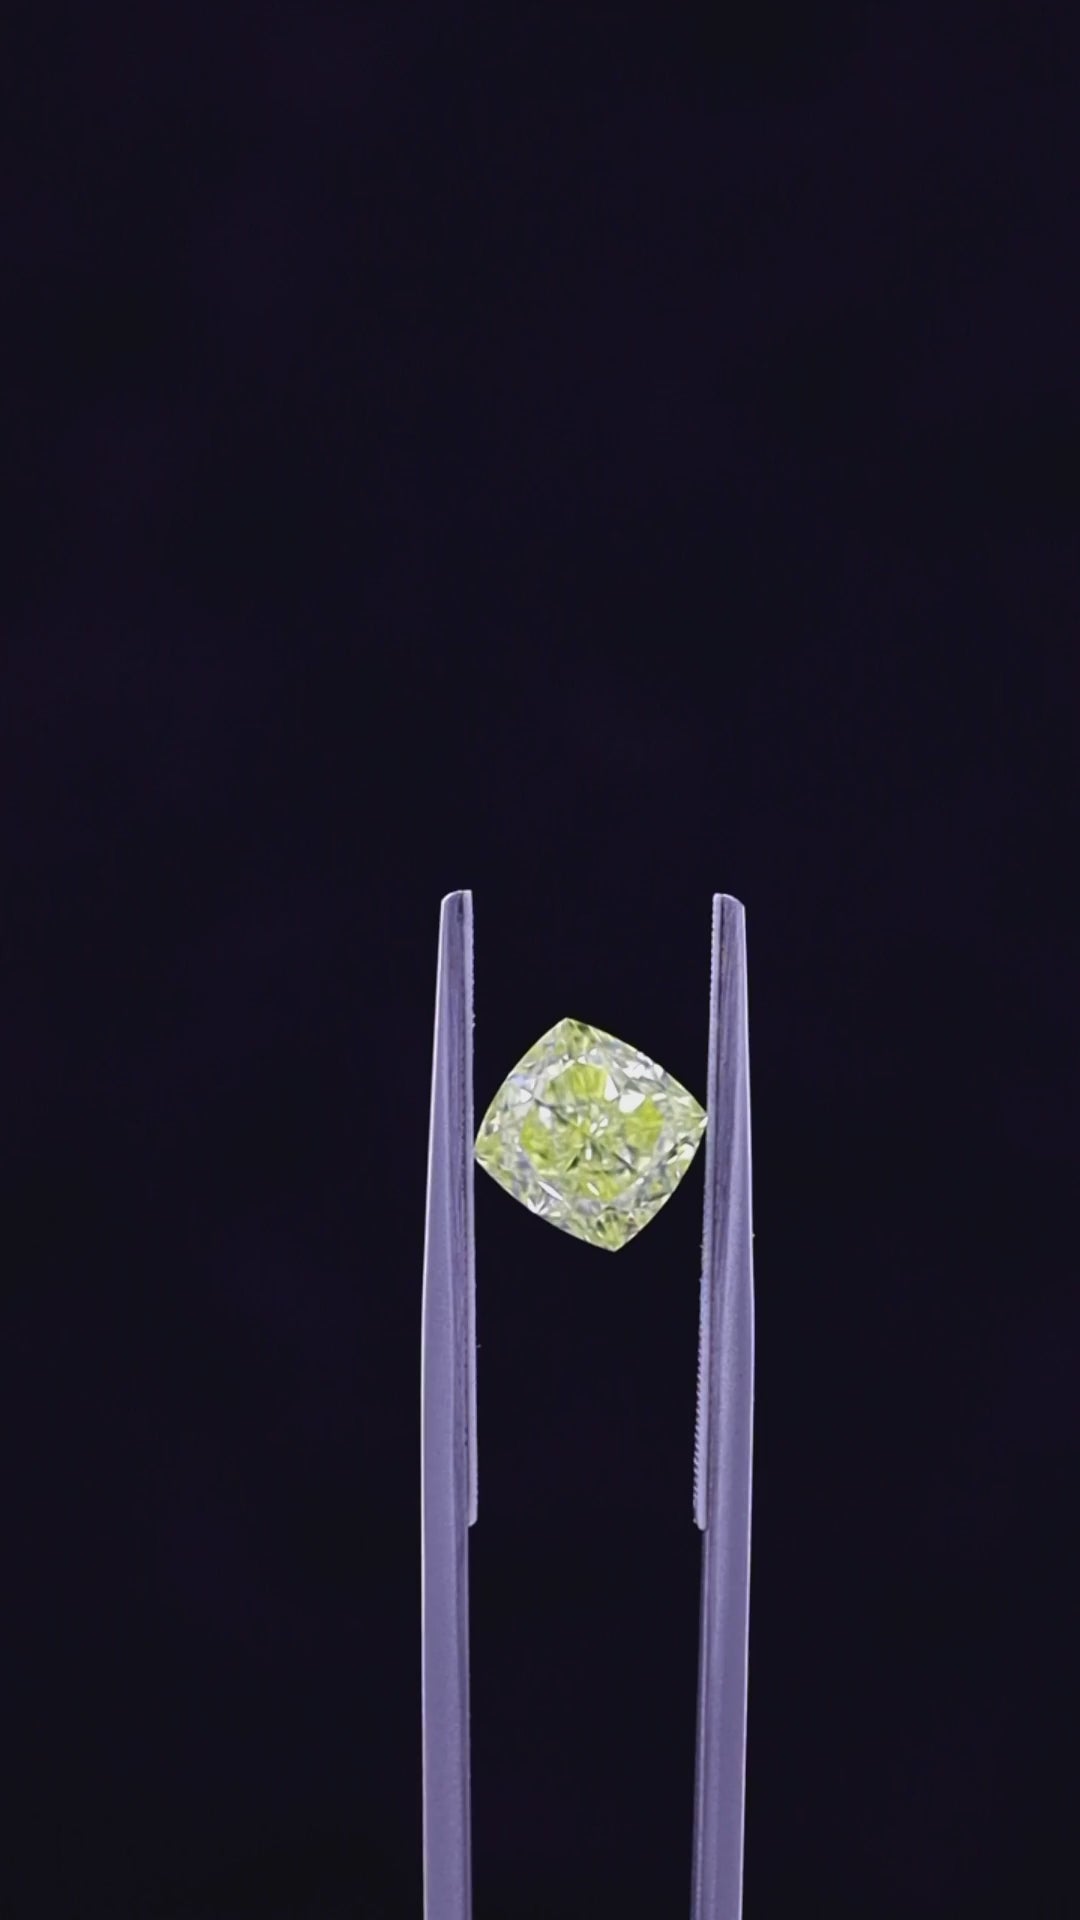 Discover the Majestic Beauty of a 3.01-Carat Fancy Intense Yellow Diamond